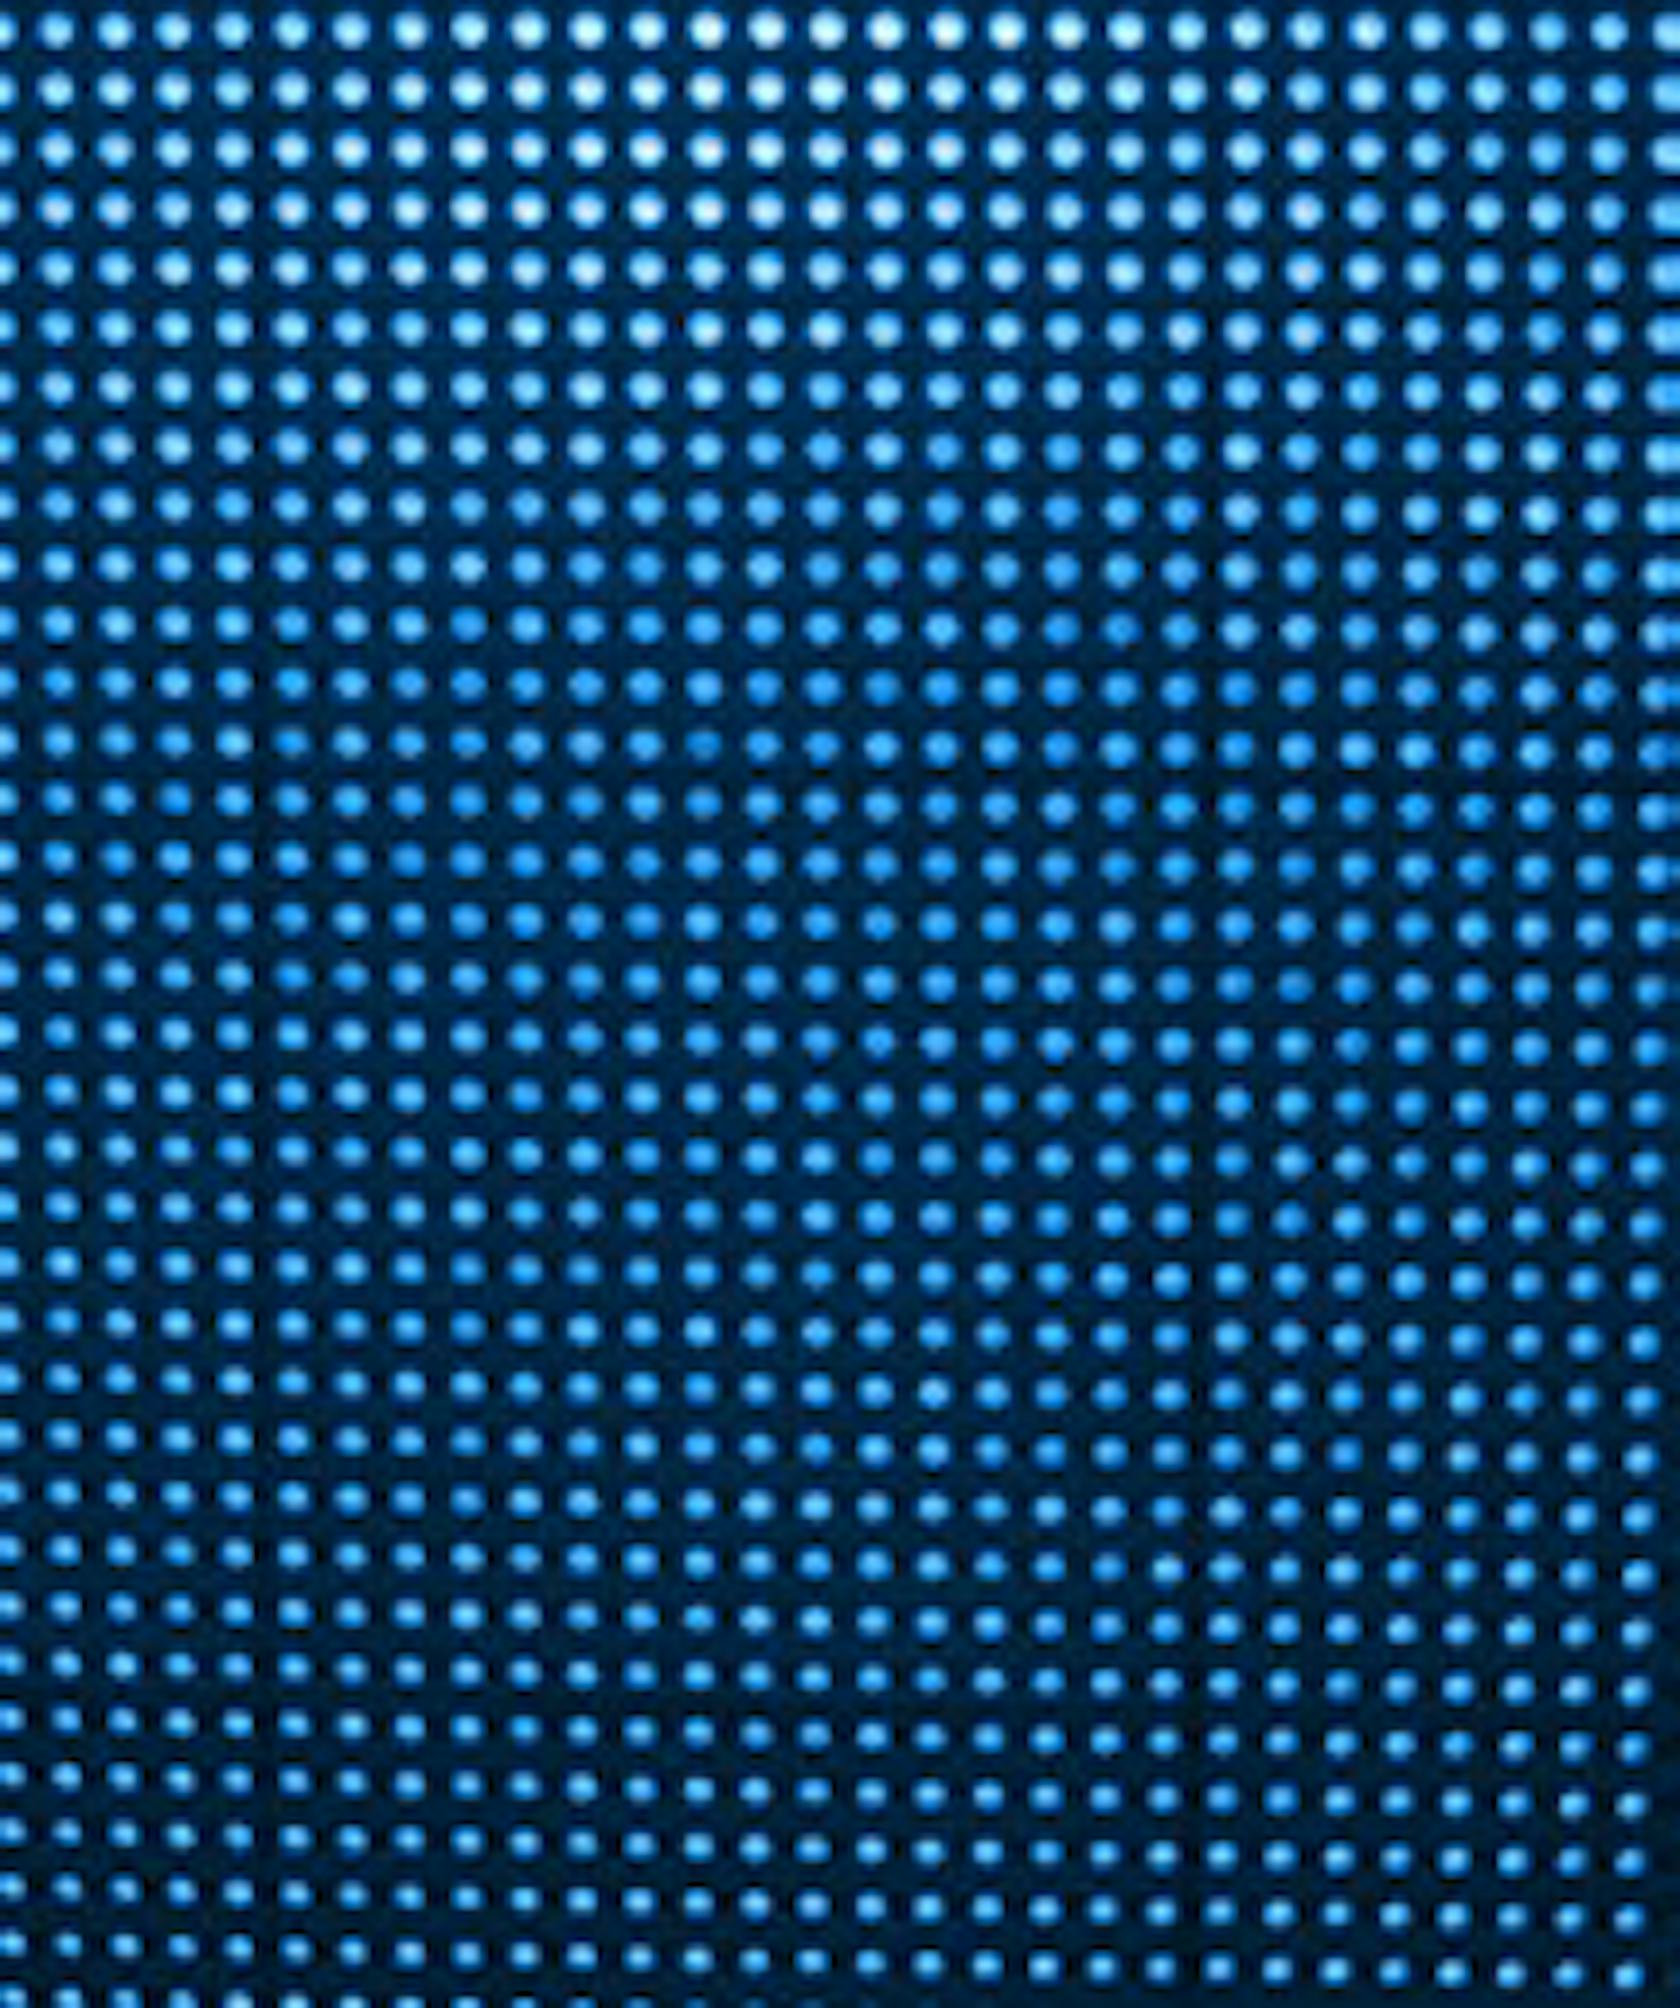 led screen closeup copy space texture futuristic magenta purple violet display green grid design equipment technology abstract electronic background blue bright panel bulb red colours light diode close pattern macro glowing emitting pixel board image view illuminated computer textured modern digital line video lamp graphic picture lcd detail monitor television